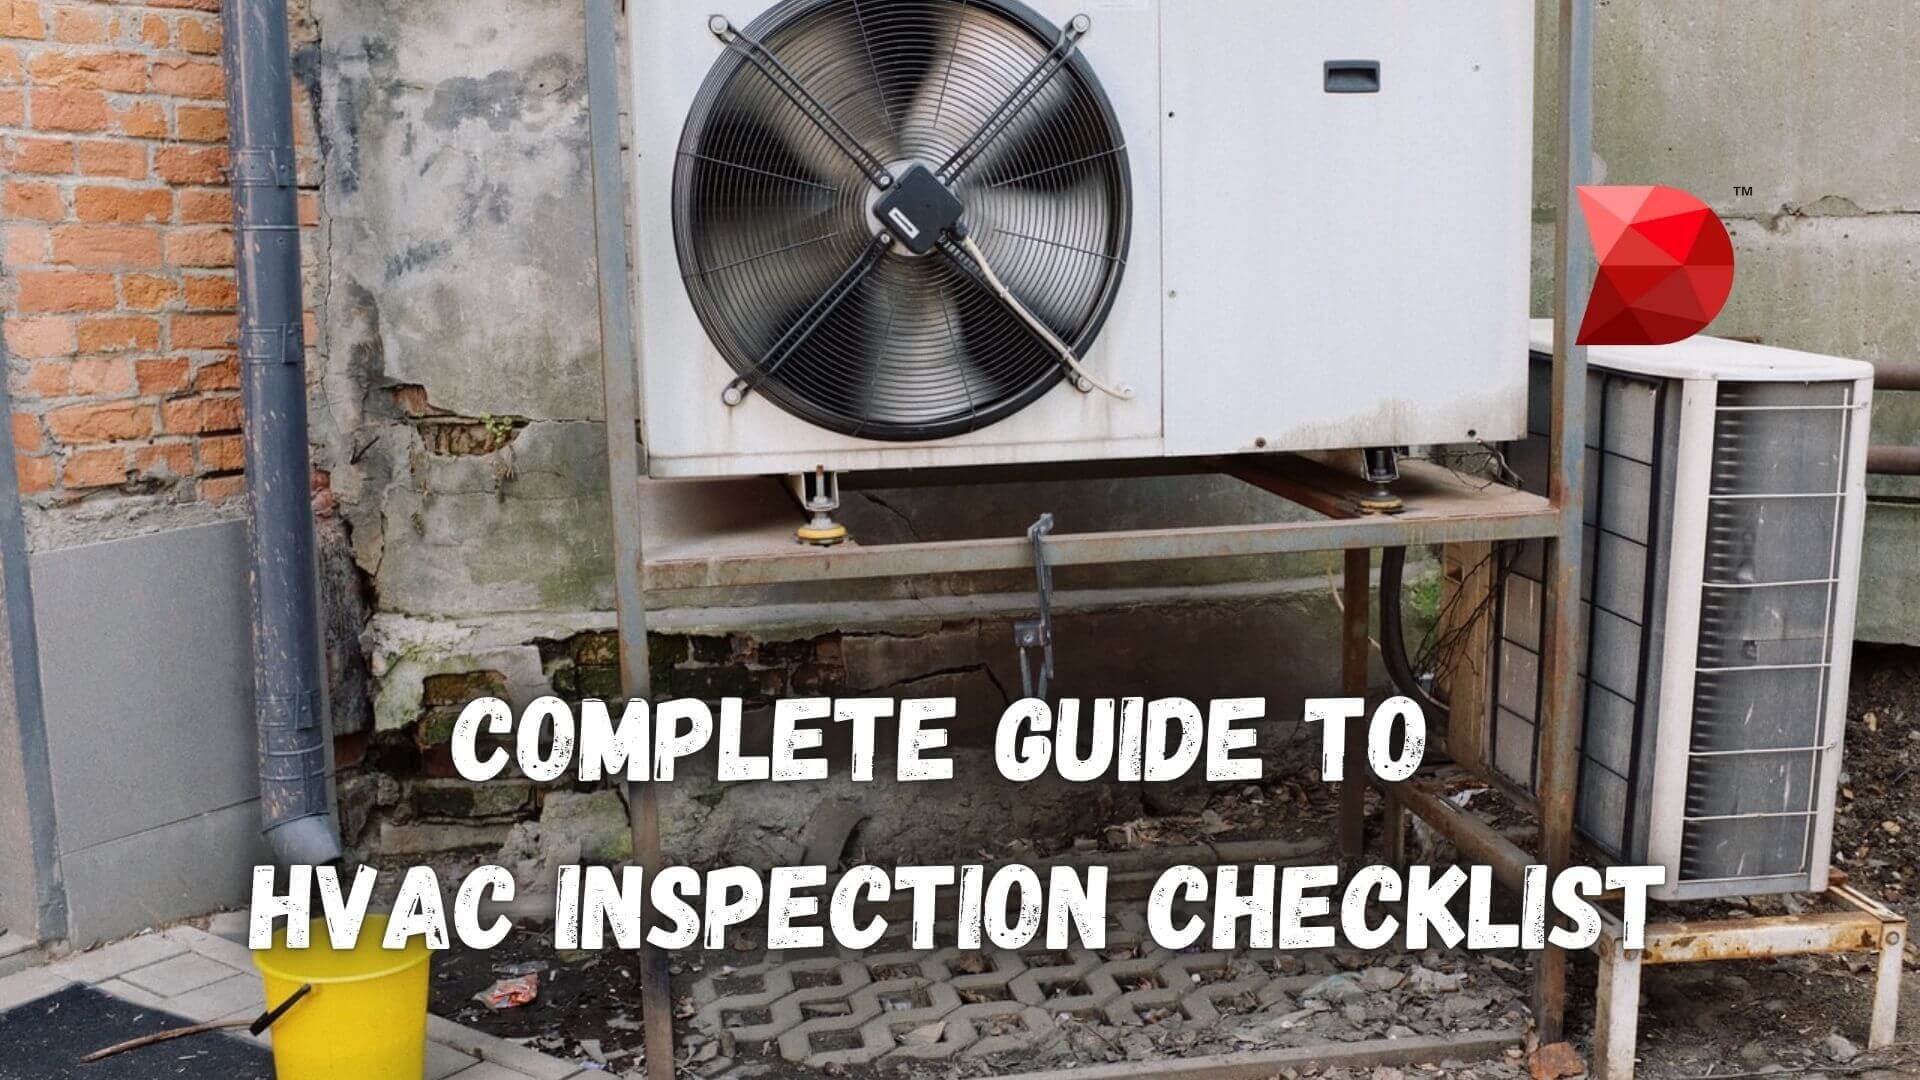 Complete Guide to HVAC Inspection Checklist